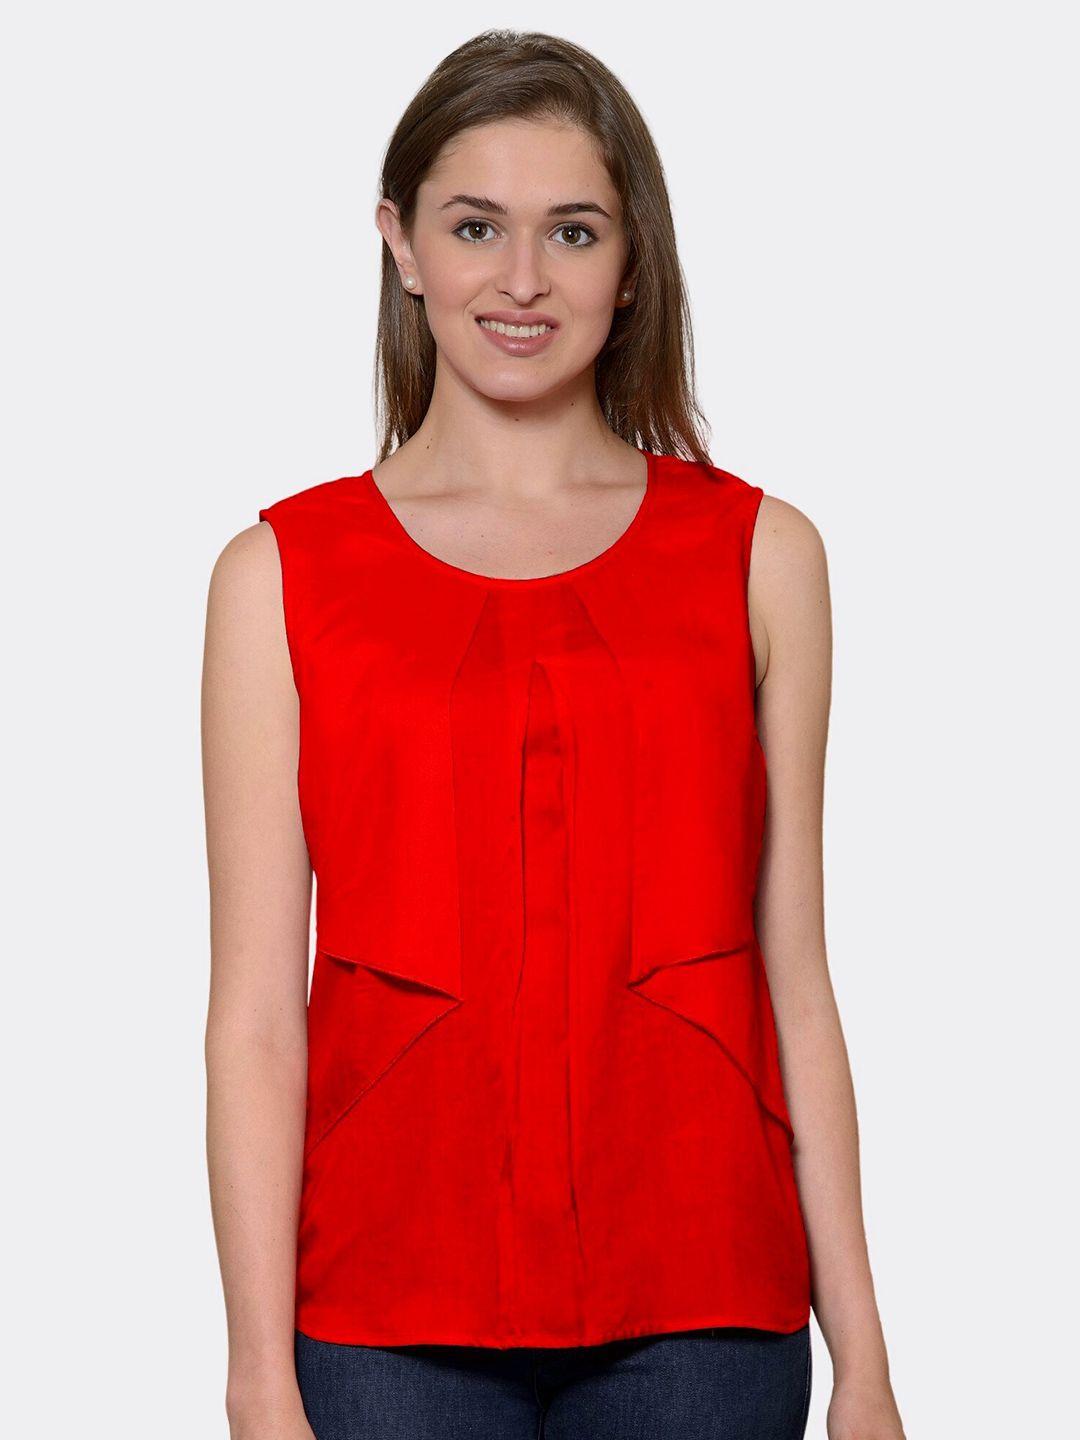 patrorna-red-layered-top